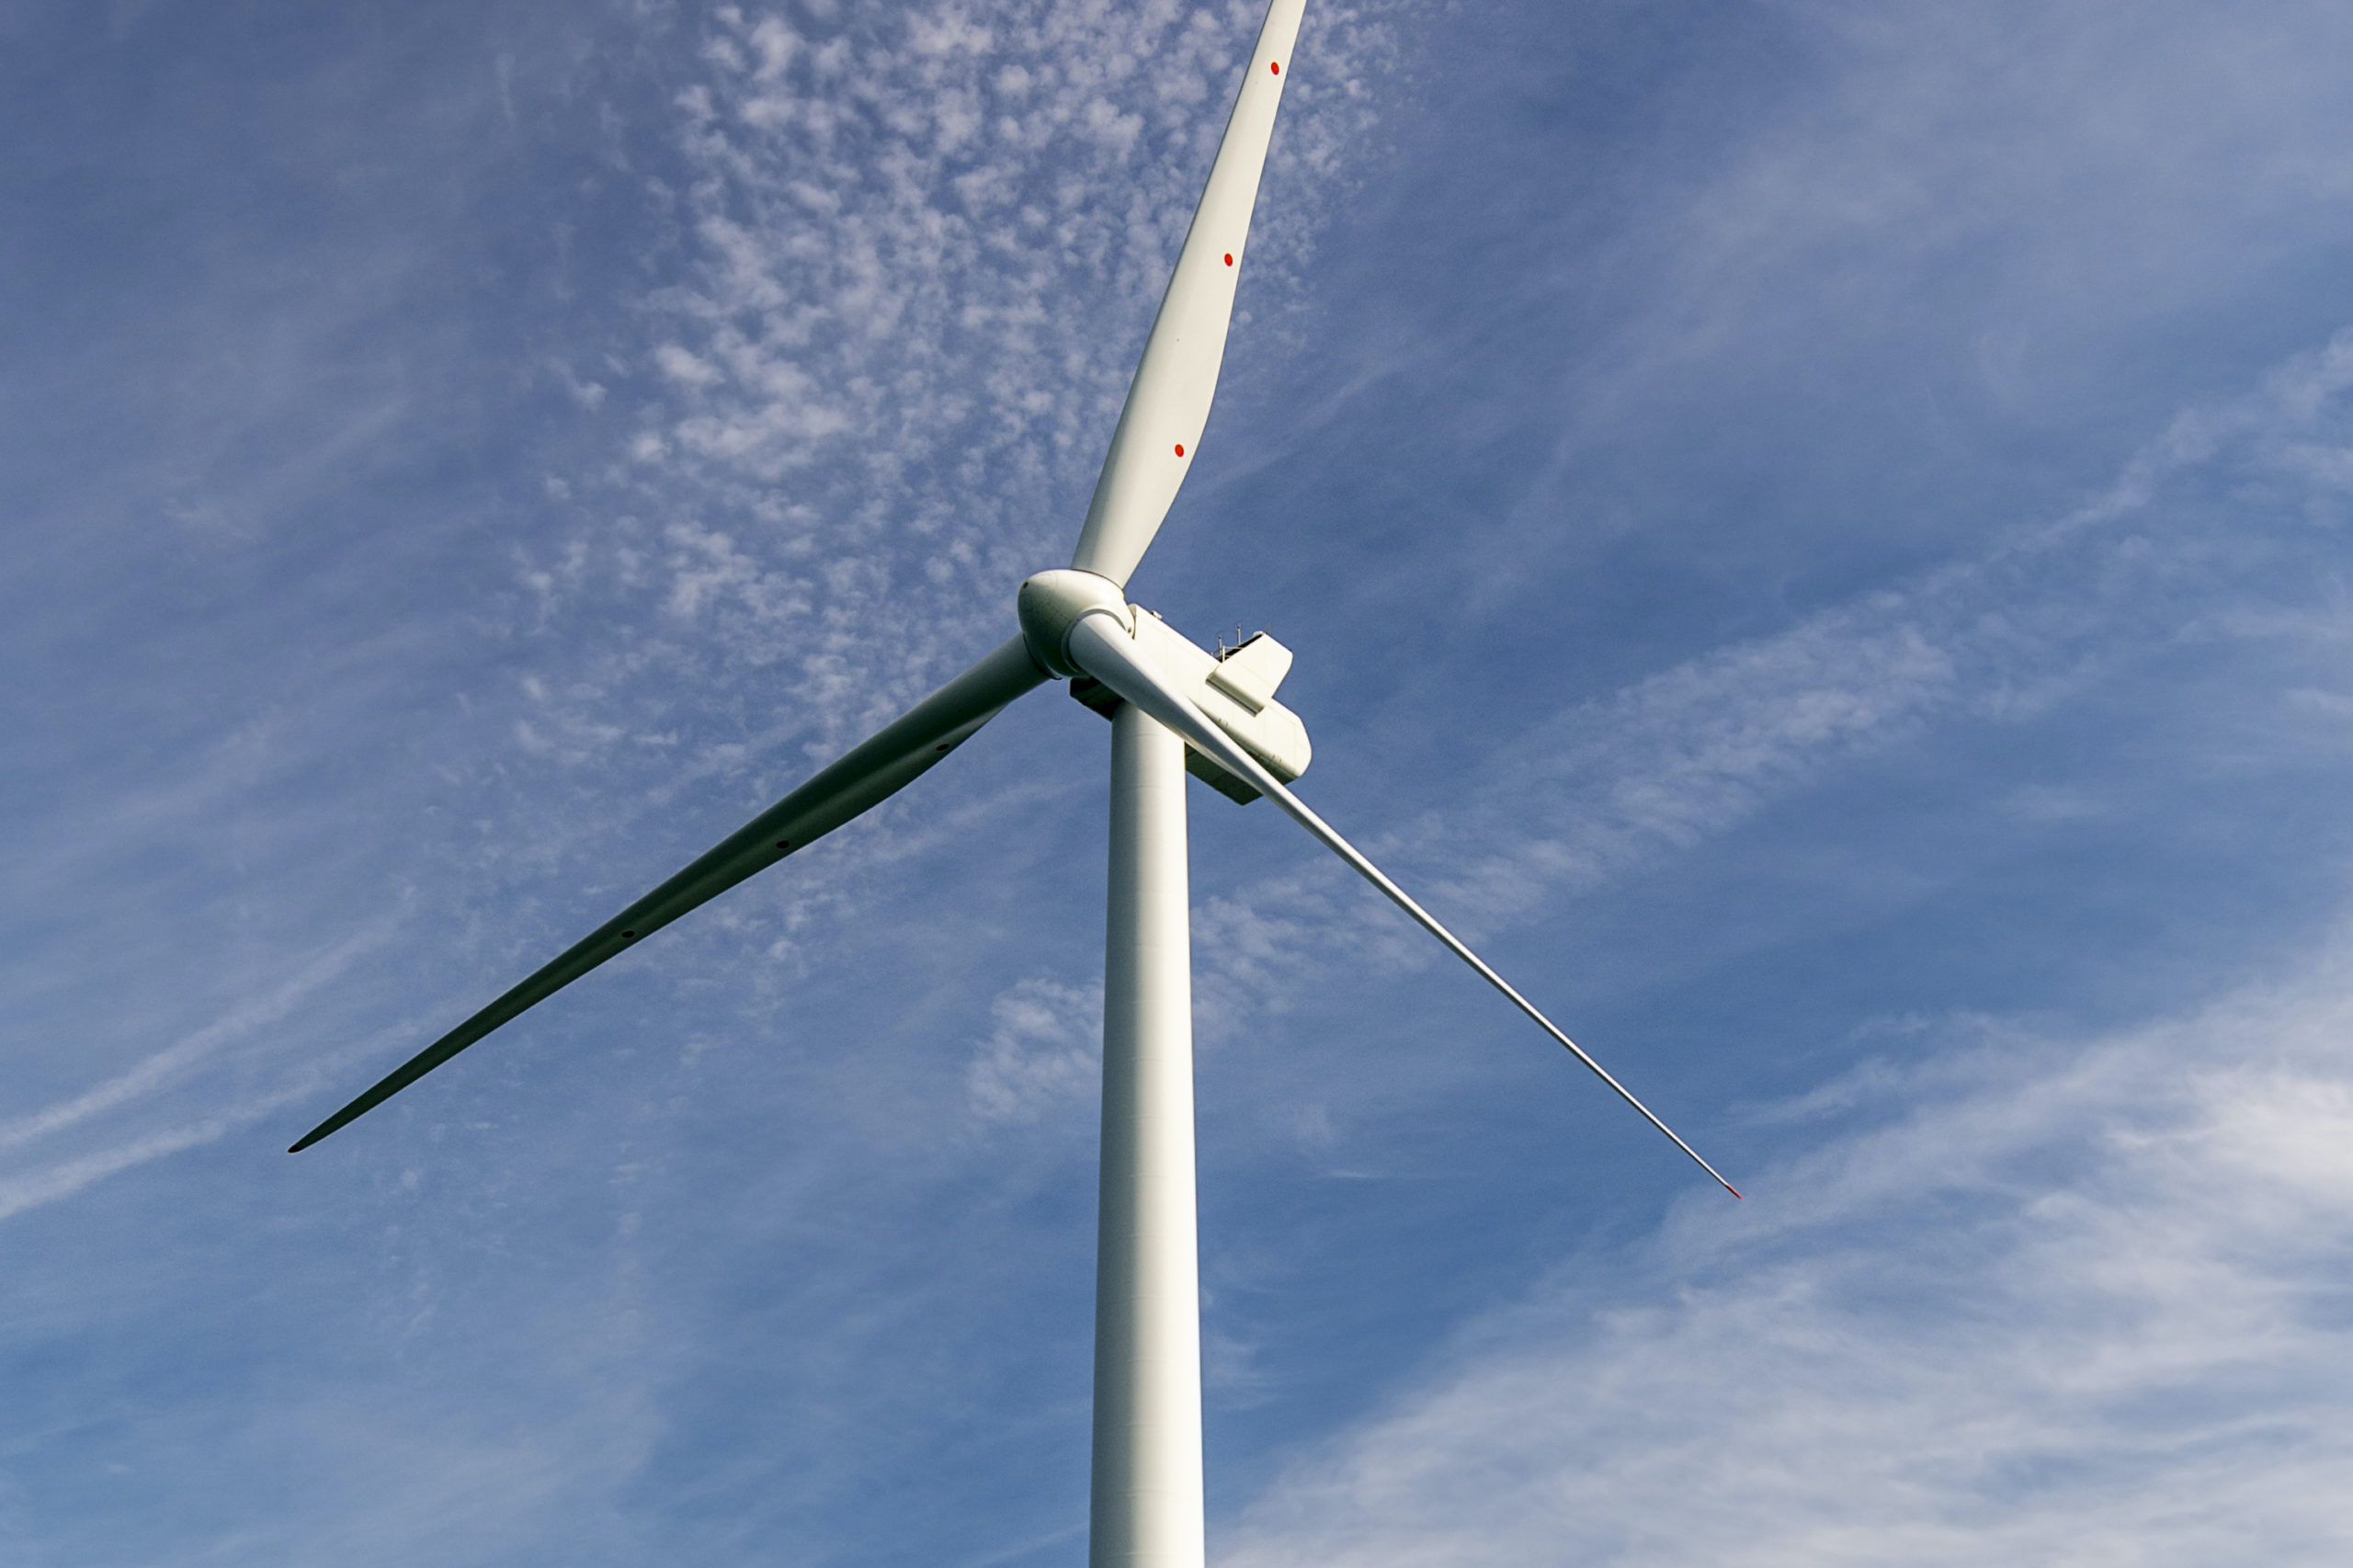 Anbaric Applauds New Jersey Leadership on its Third Offshore Wind Solicitation Awards